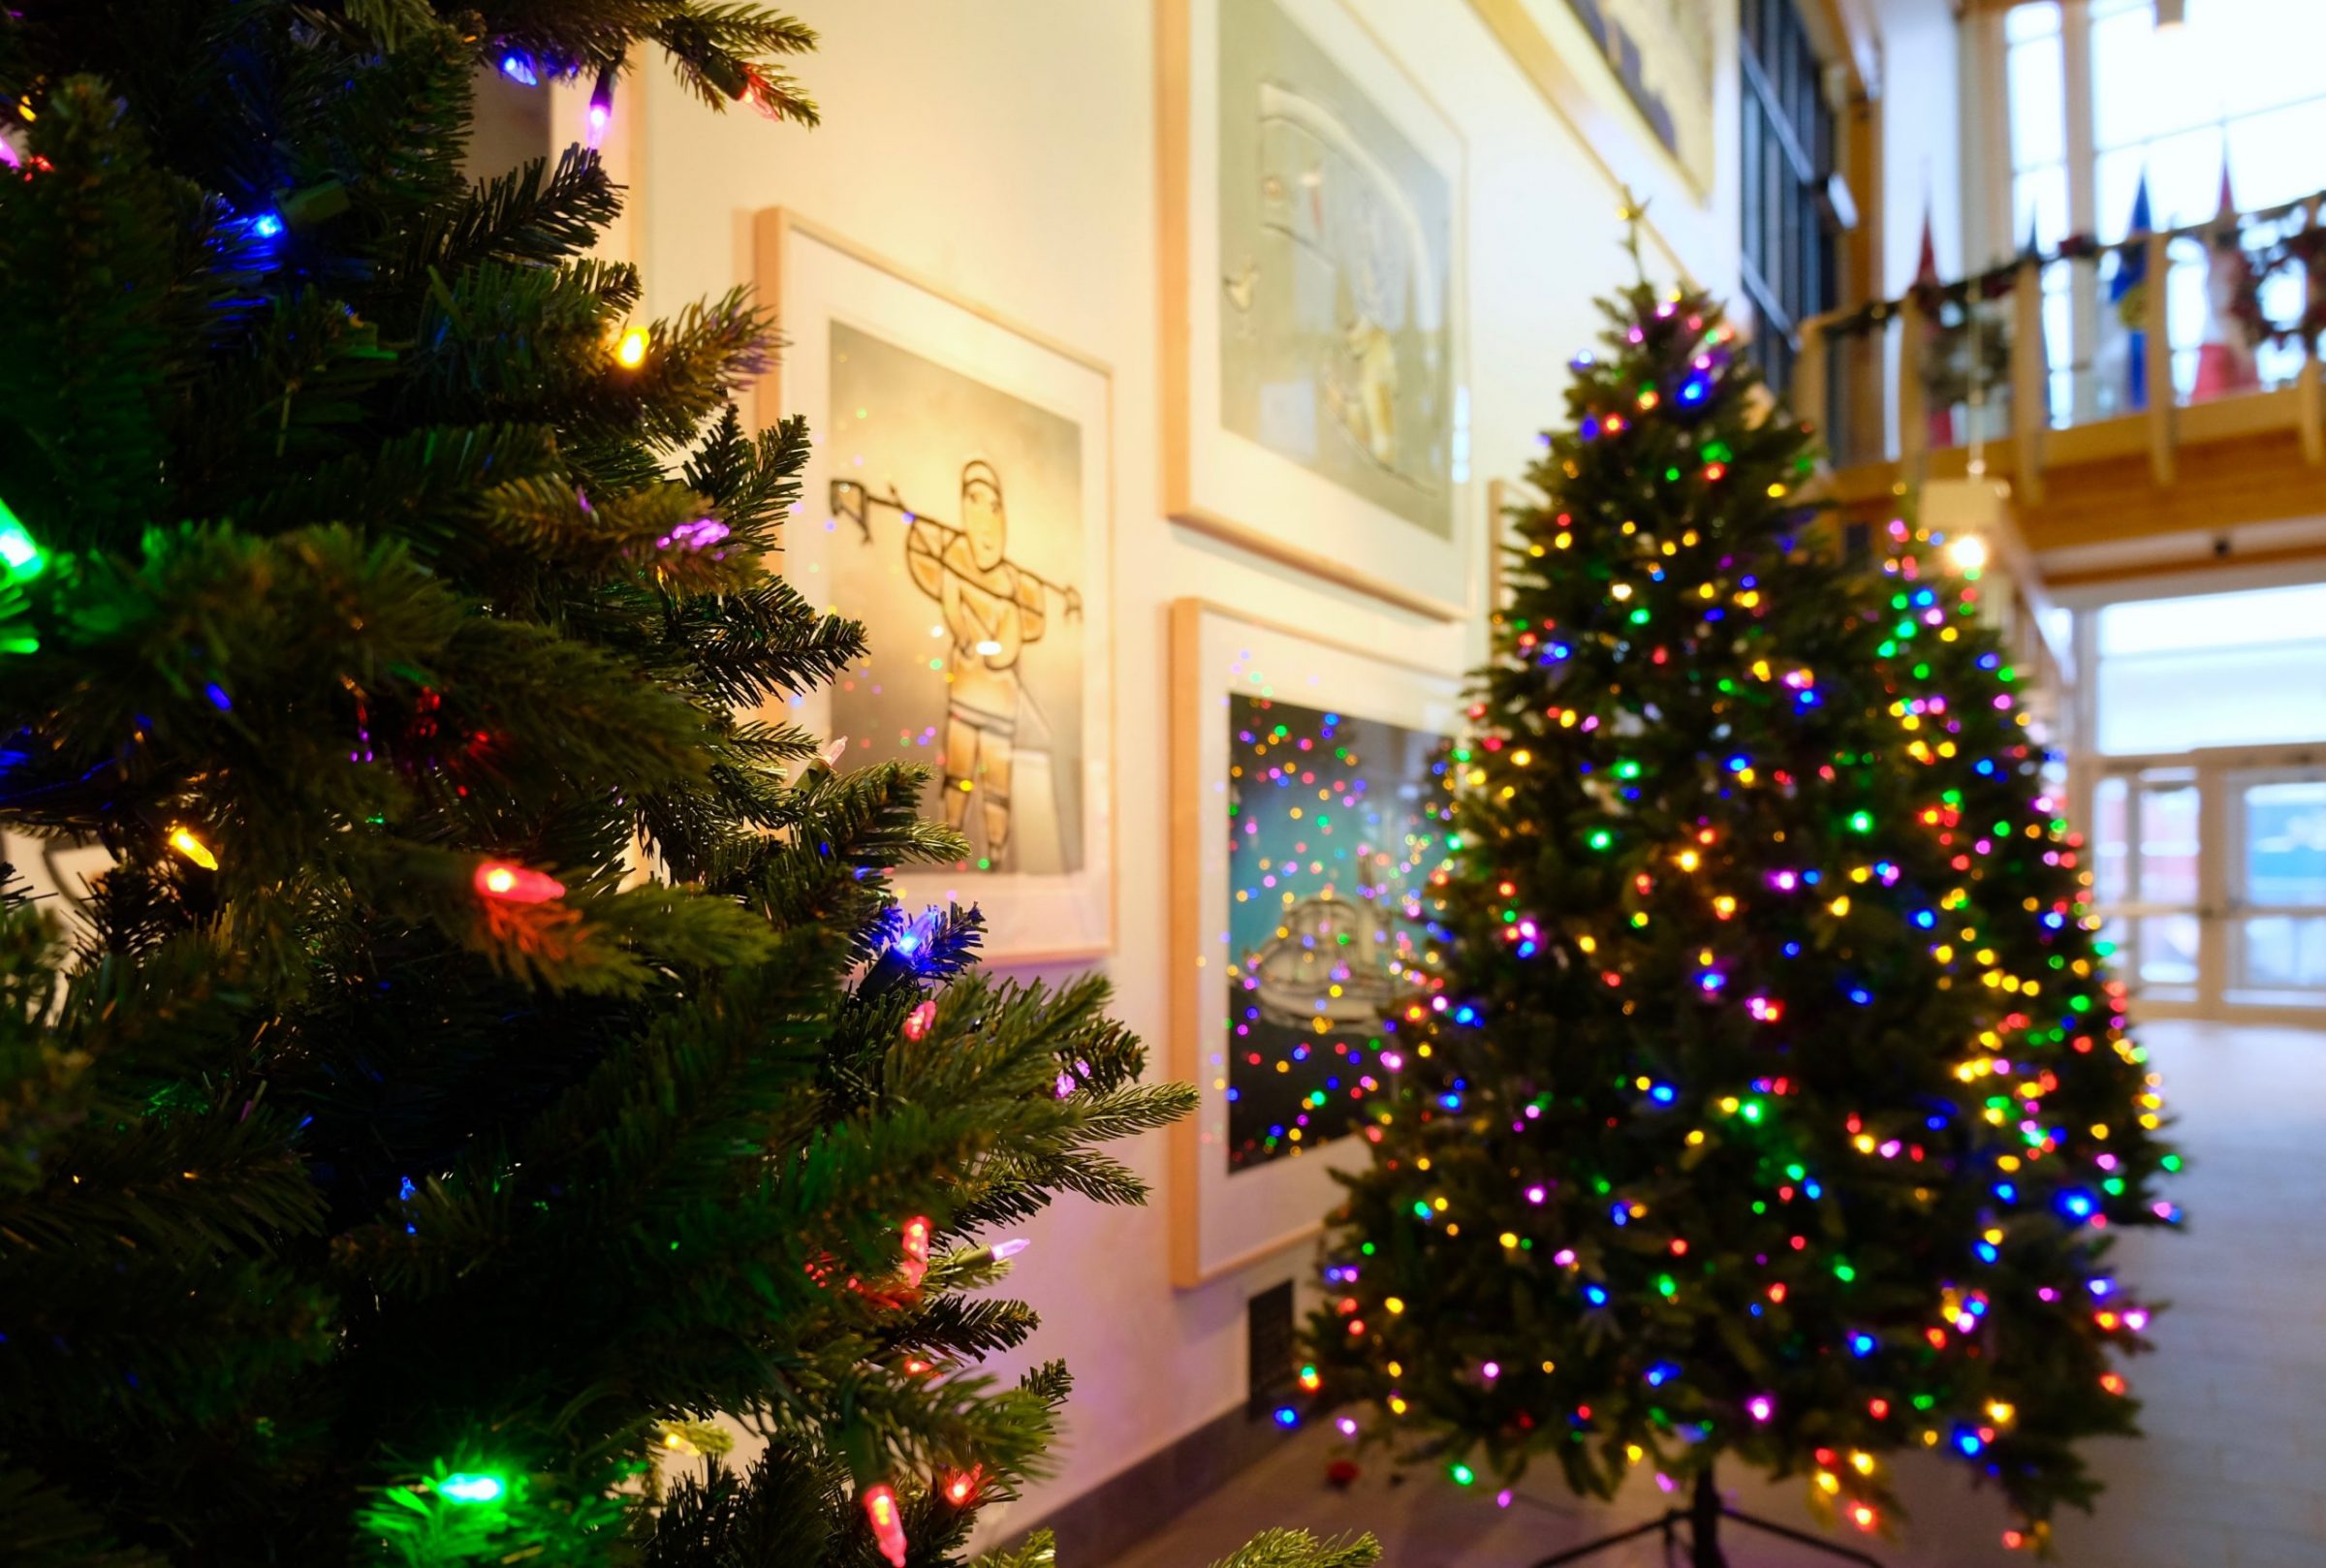 With Christmas a month away, the legislature building in Iqaluit is being decorated inside and out. In the lobby, Christmas trees stand in front of framed prints by the late Elisapee Ishulutaq. (Photo by Mélanie Ritchot)